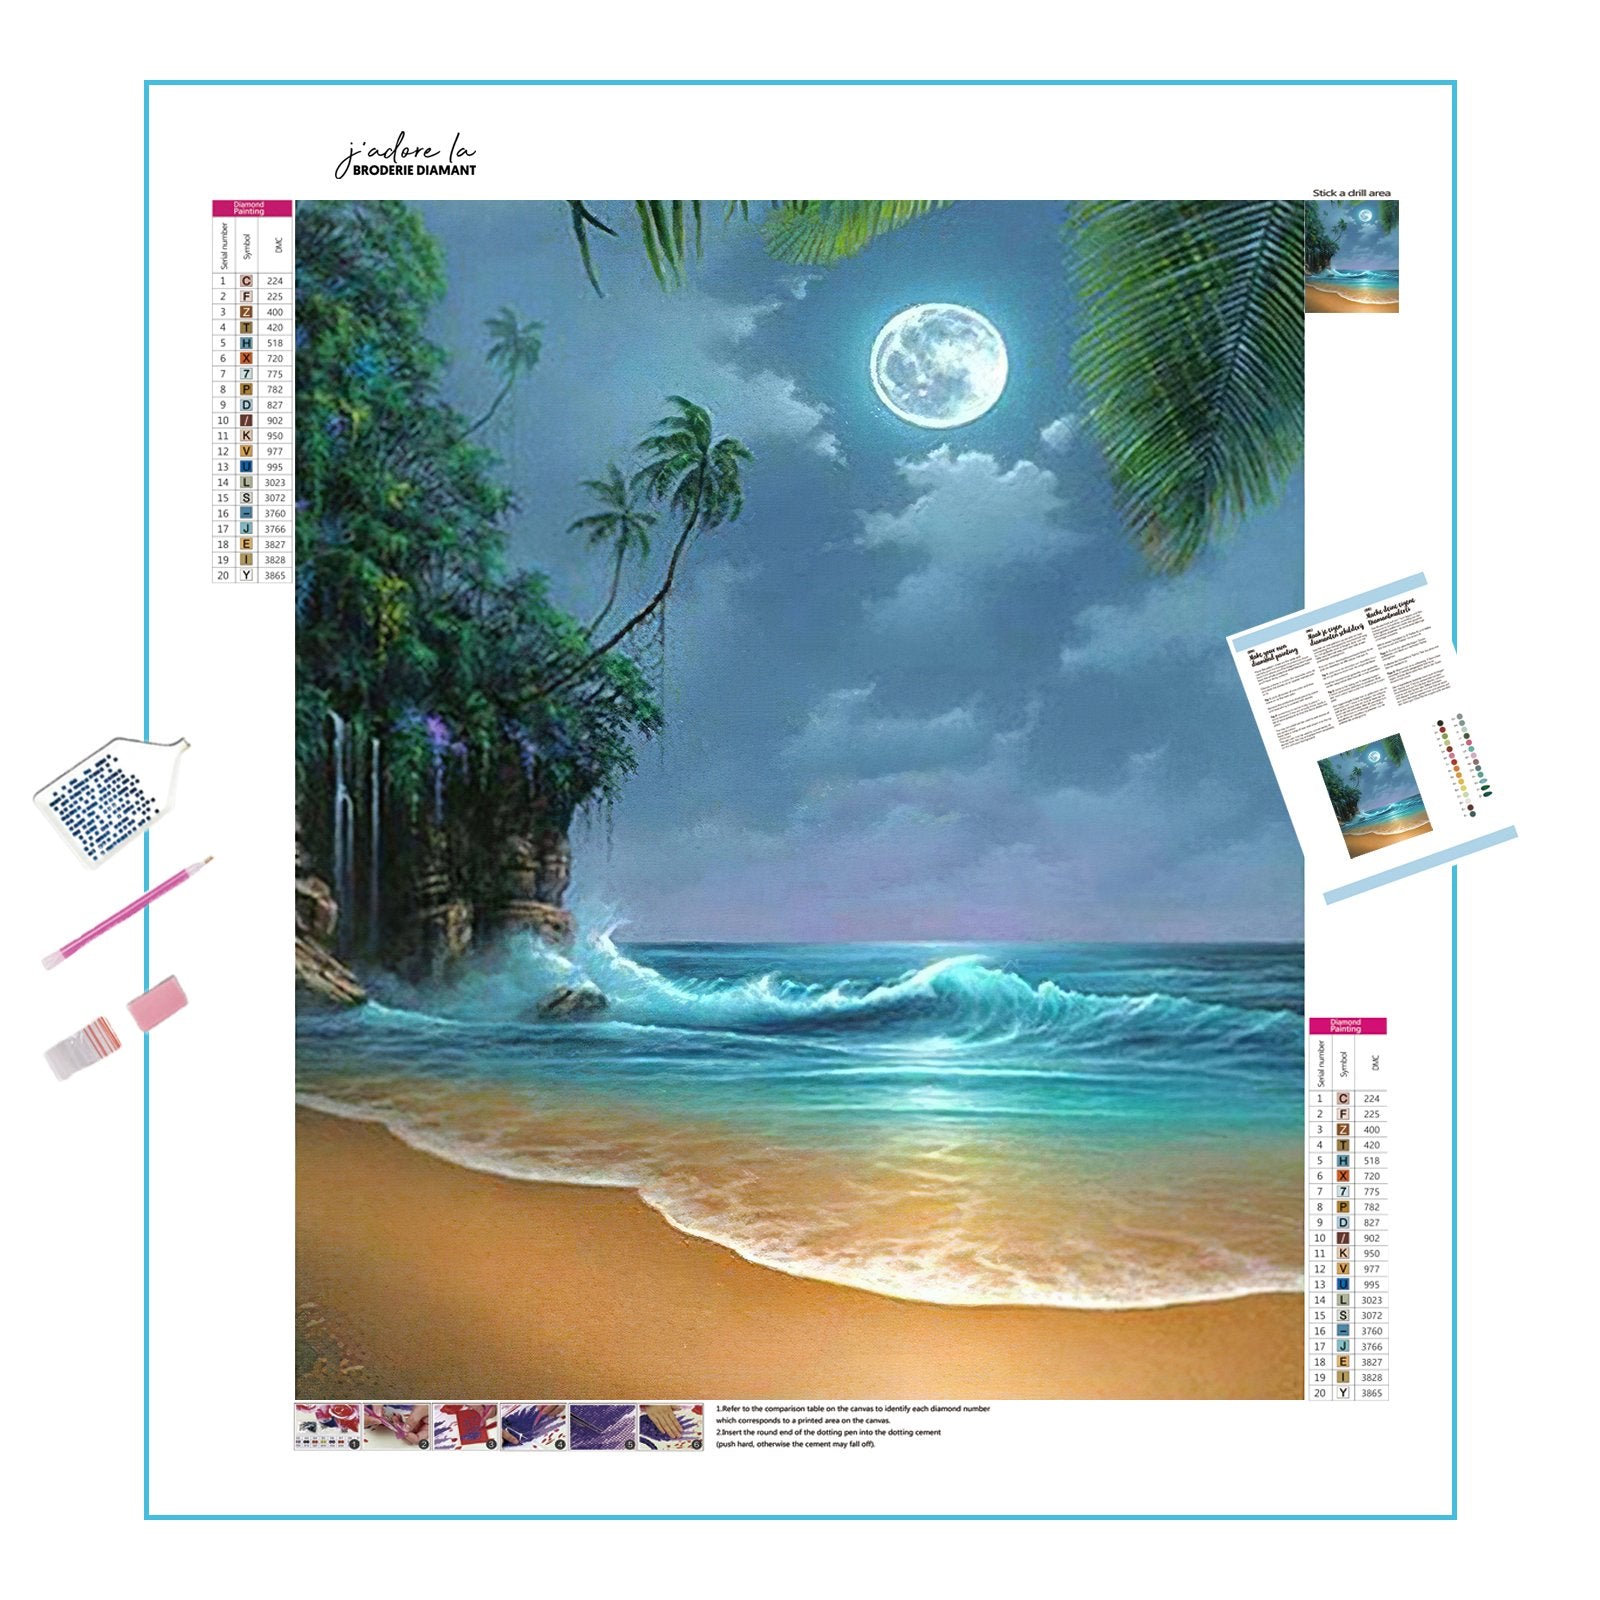 Experience the tranquility of the Moon shining upon the sea.Moon Upon The Sea - Diamondartlove